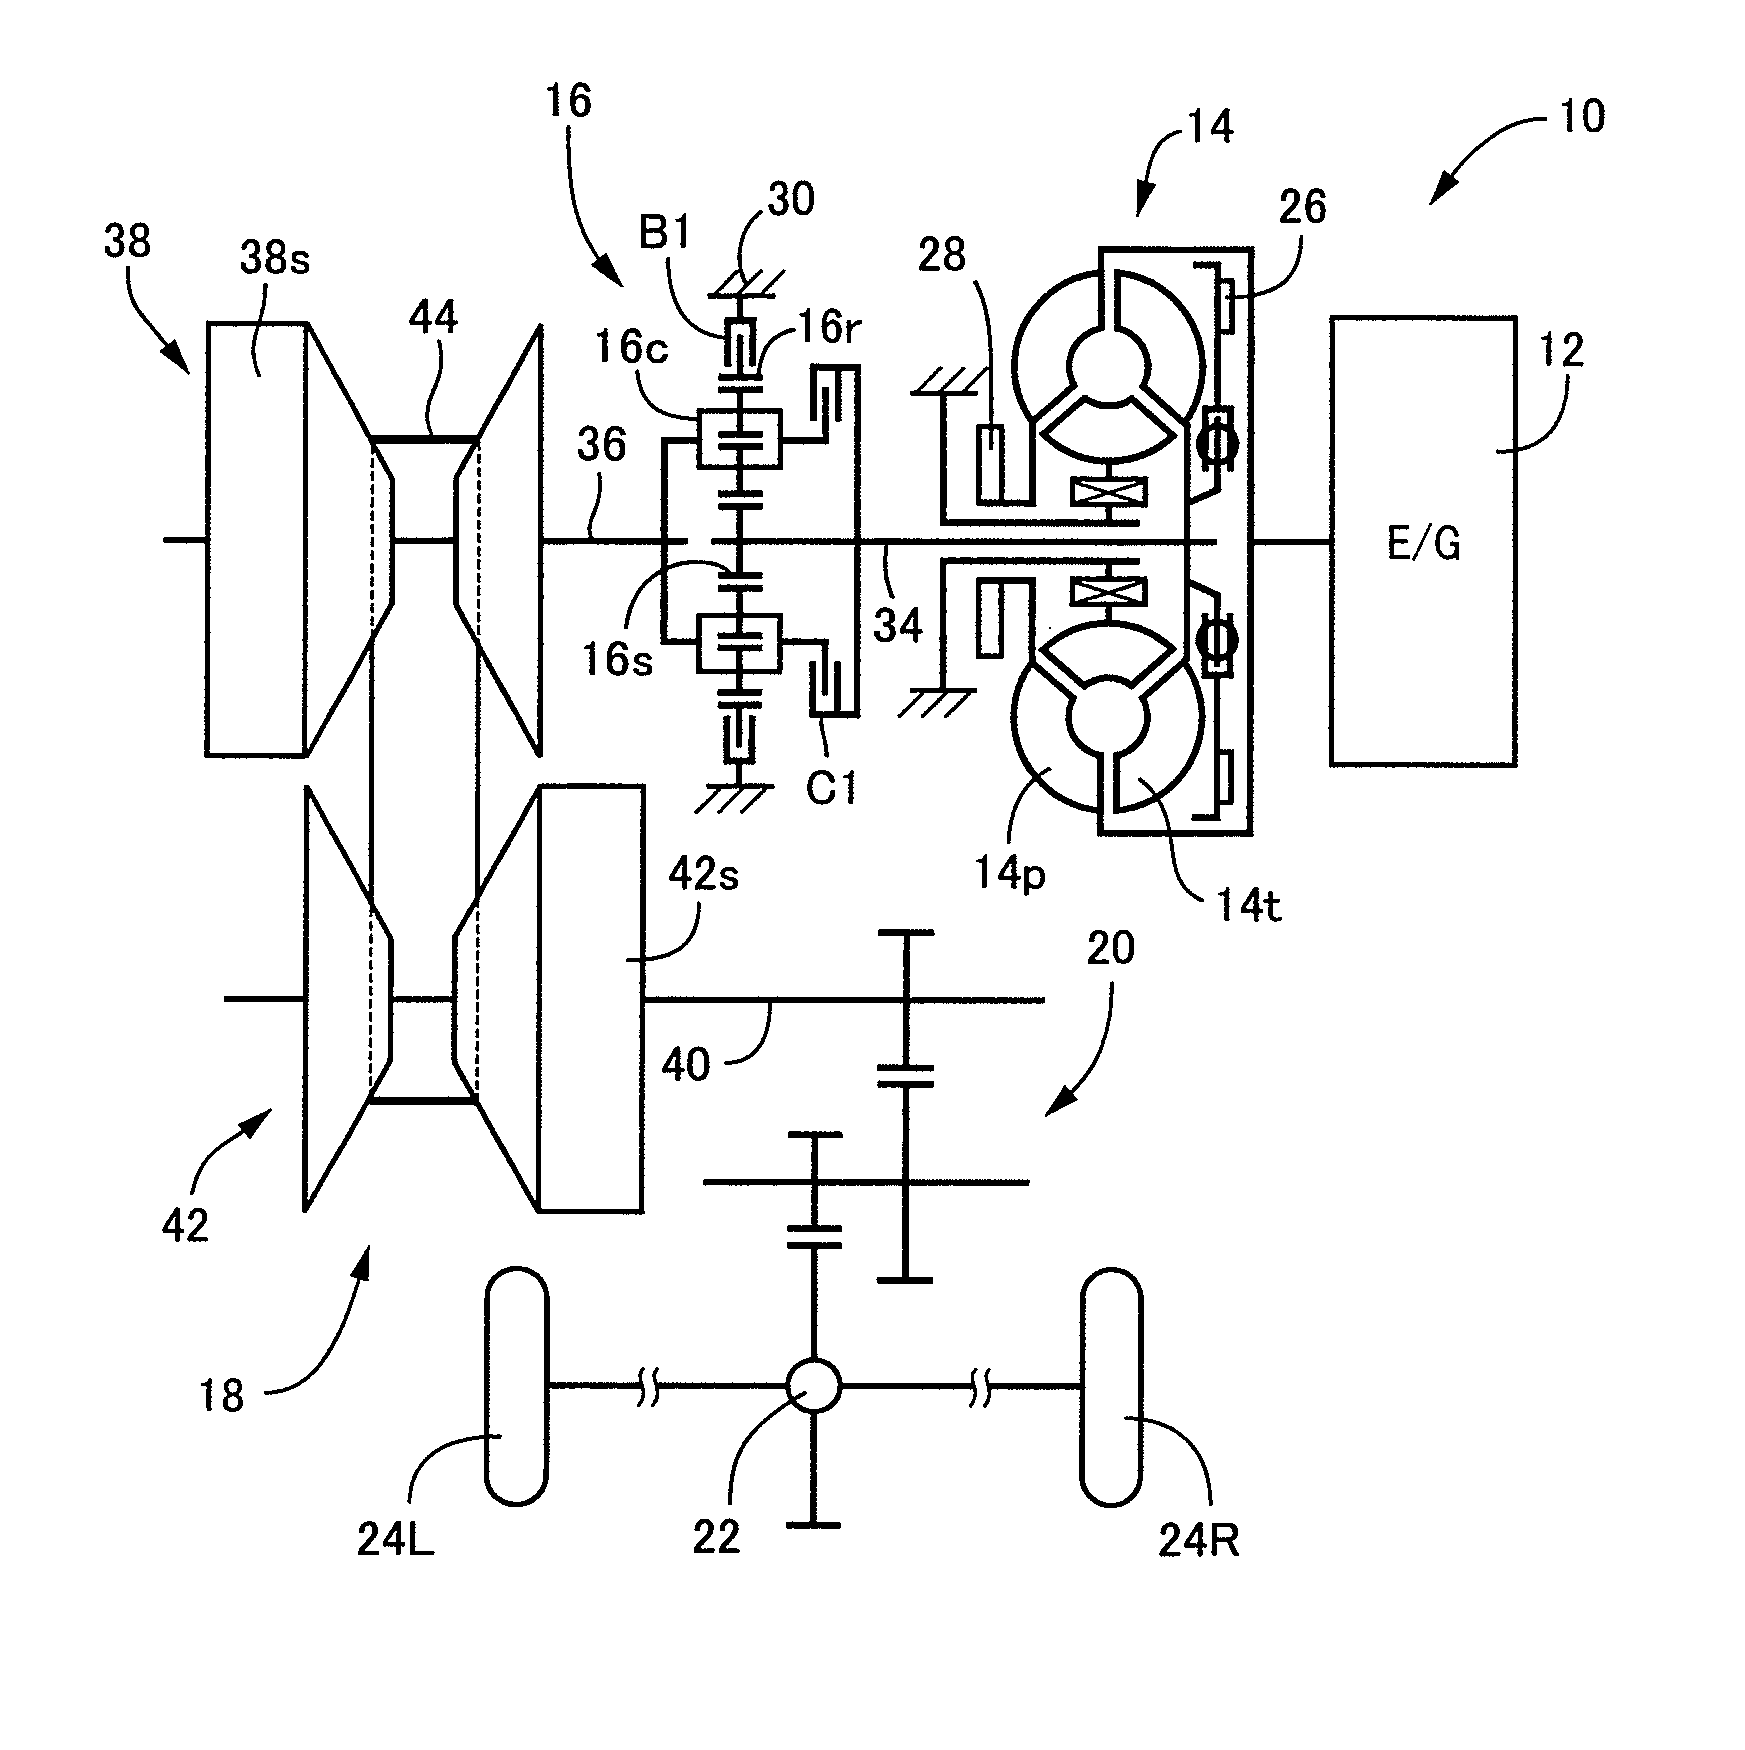 Shift control device for vehicular continuously variable transmission